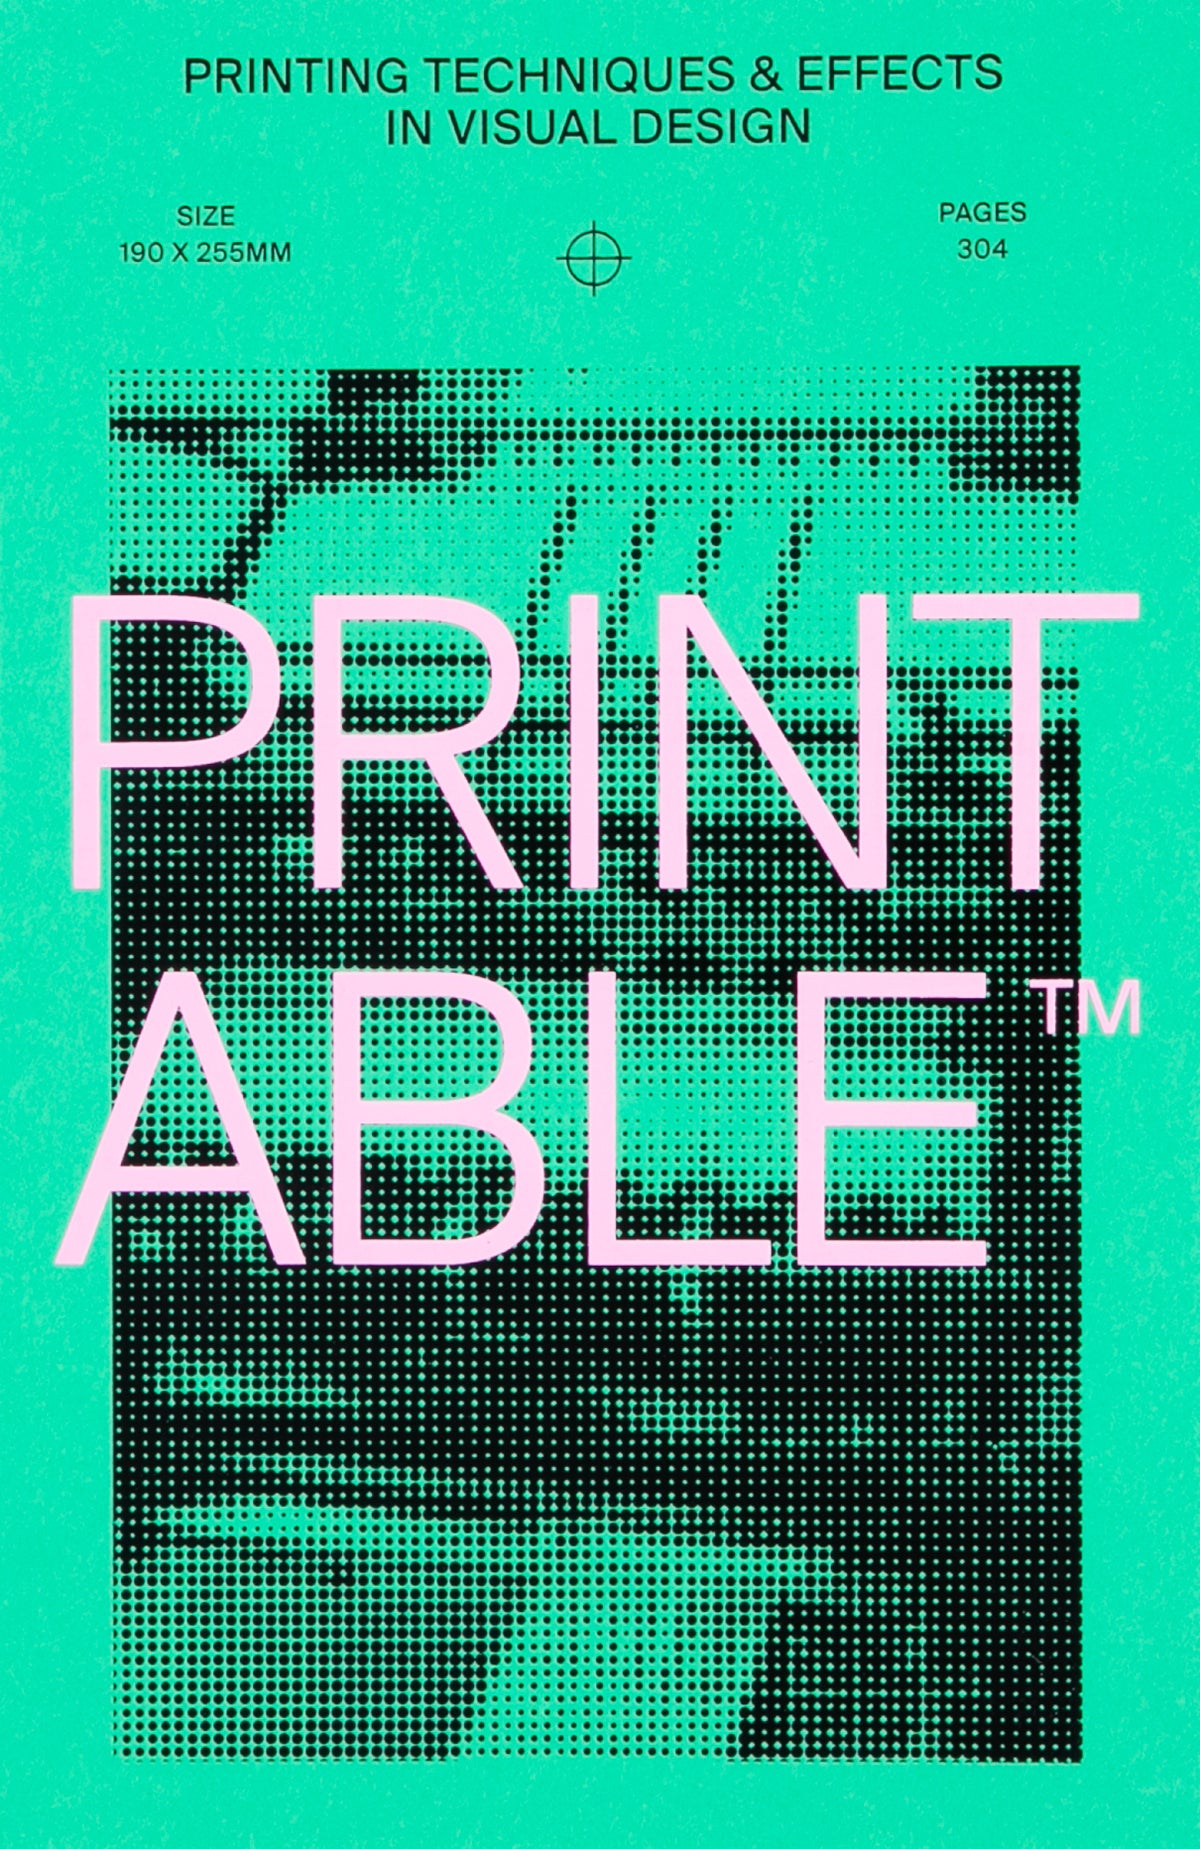 Printable: Printing Techniques and Effects in Visual Design